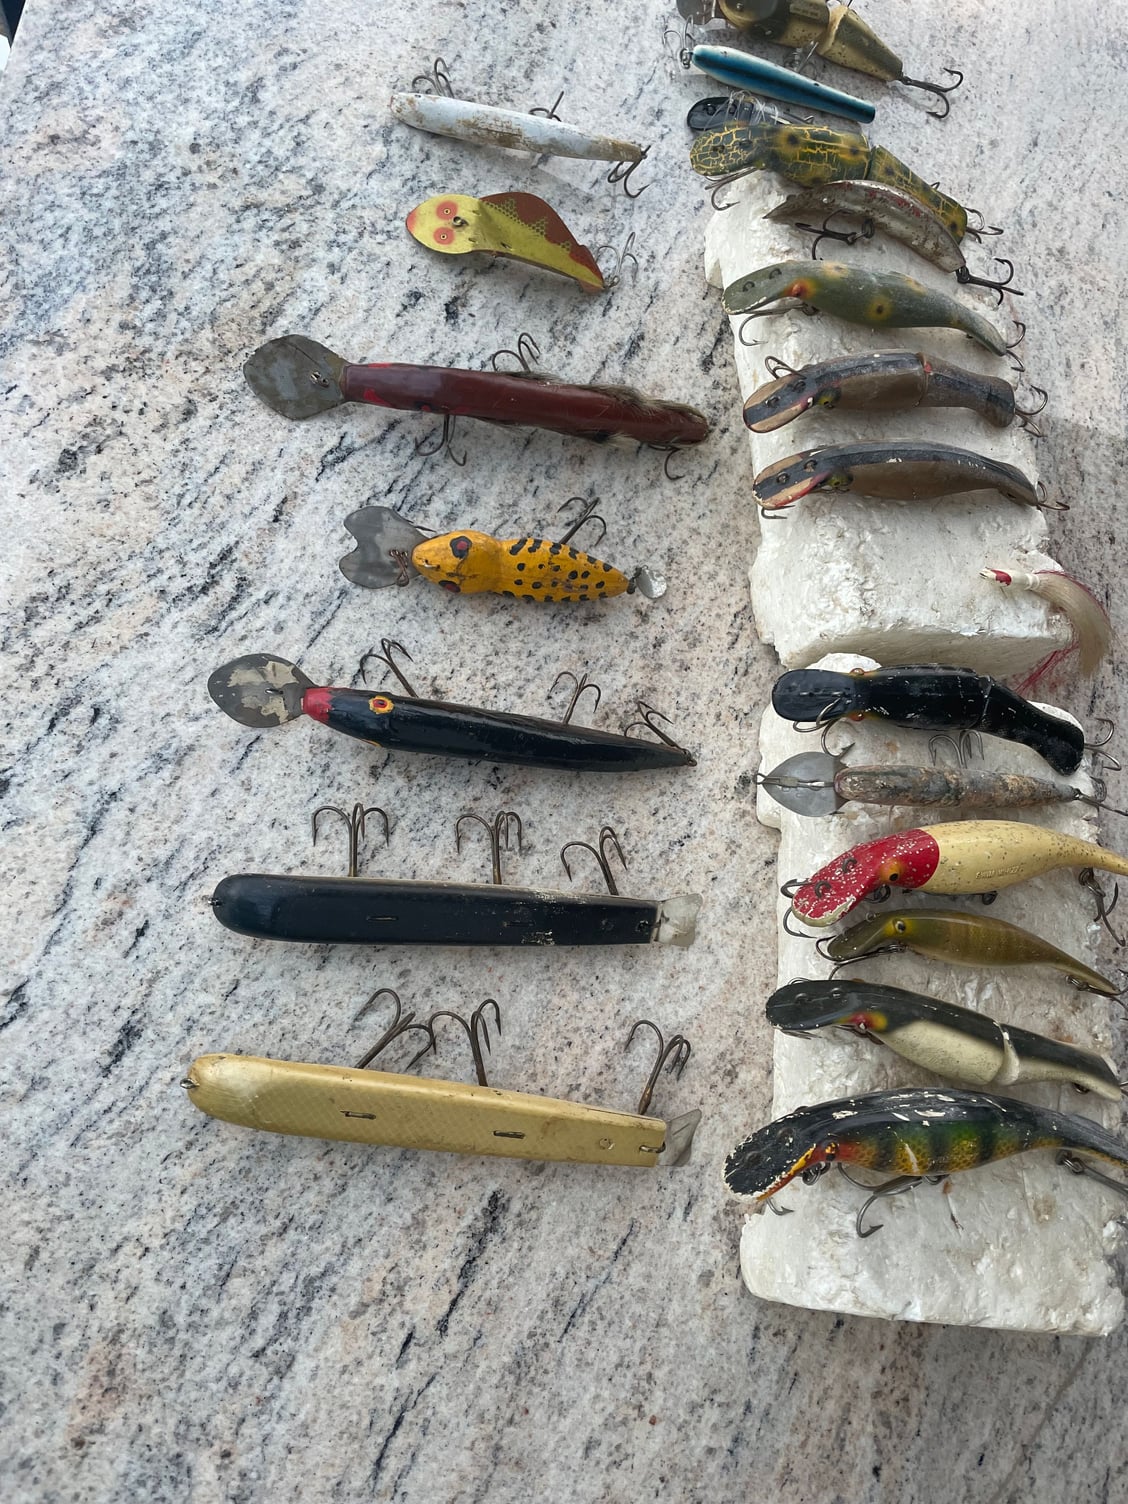 plugs and lures, new and used, - The Hull Truth - Boating and